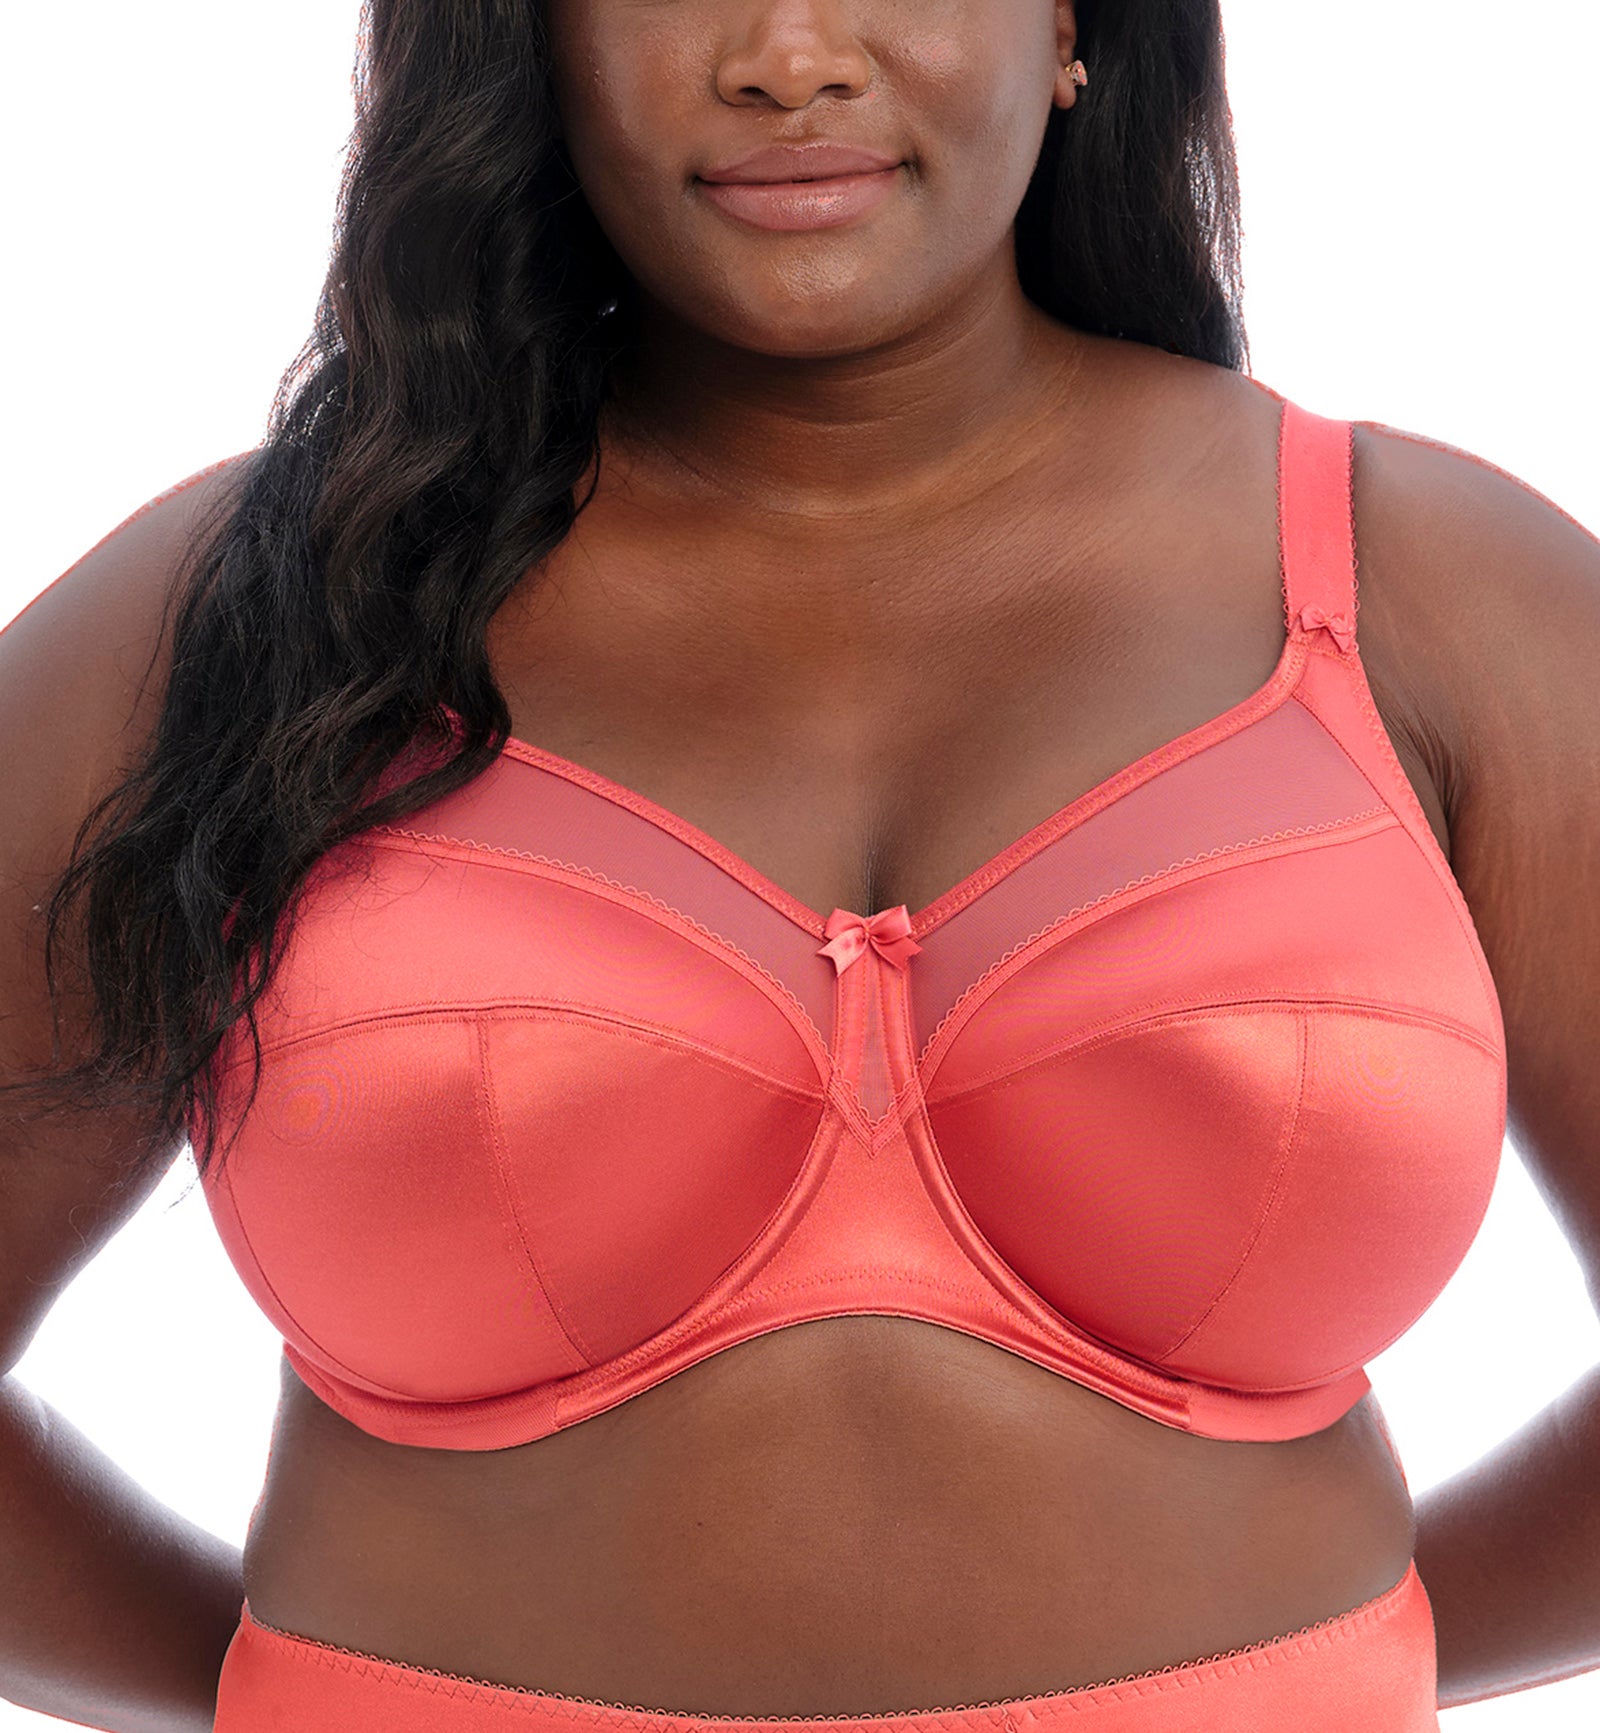 Goddess Keira Support Underwire Bra (6090),34I,Mineral Red - Mineral Red,34I